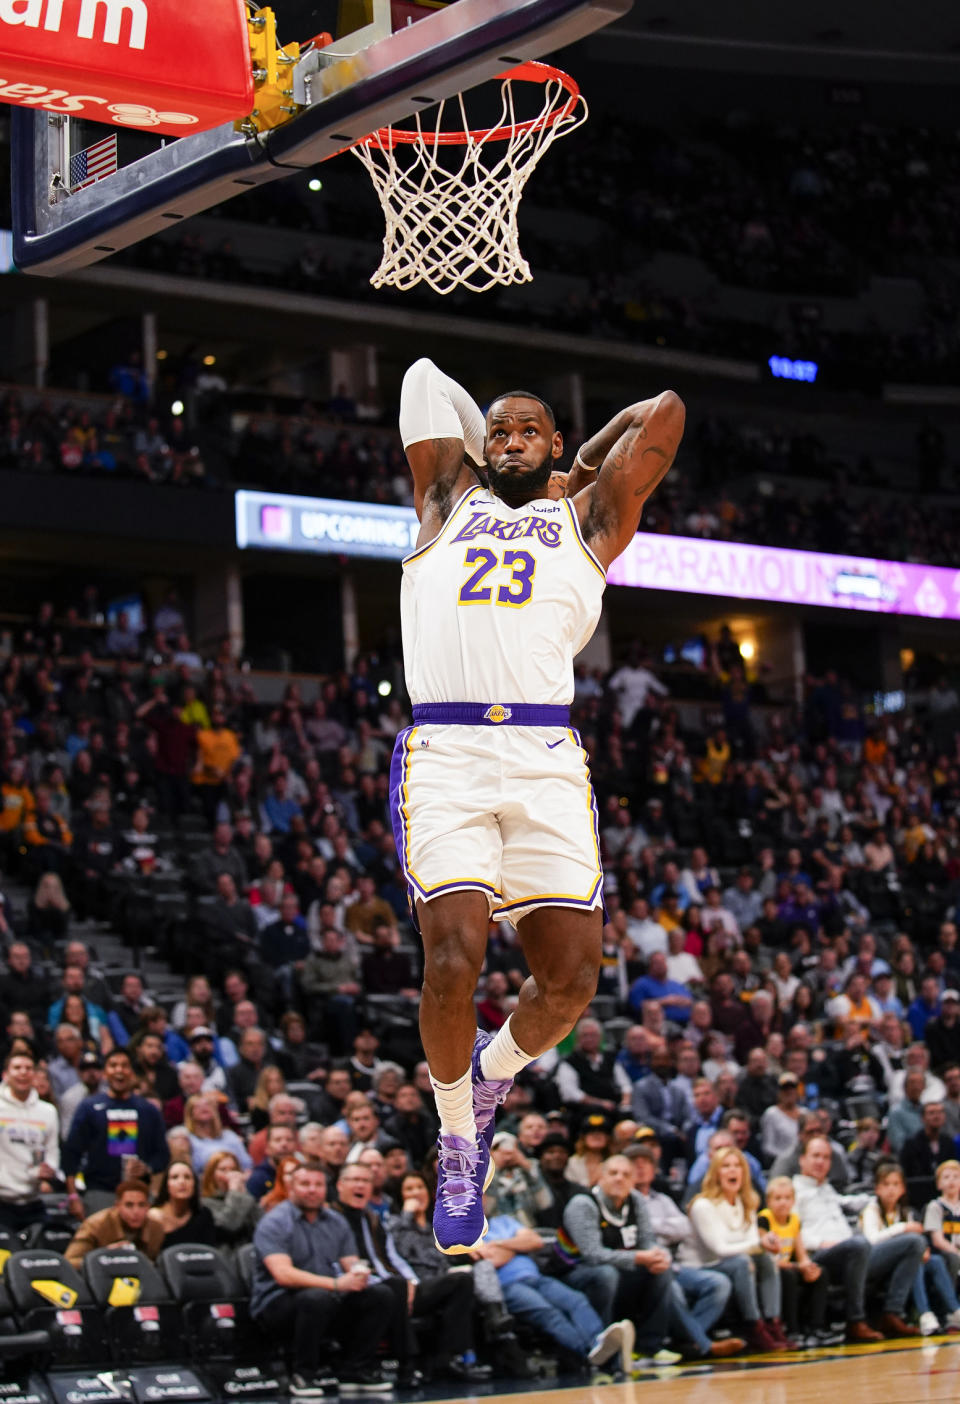 Los Angeles Lakers forward LeBron James dunks against the Denver Nuggets during the first quarter an NBA basketball game Tuesday, Dec. 3, 2019, in Denver. (AP Photo/Jack Dempsey)